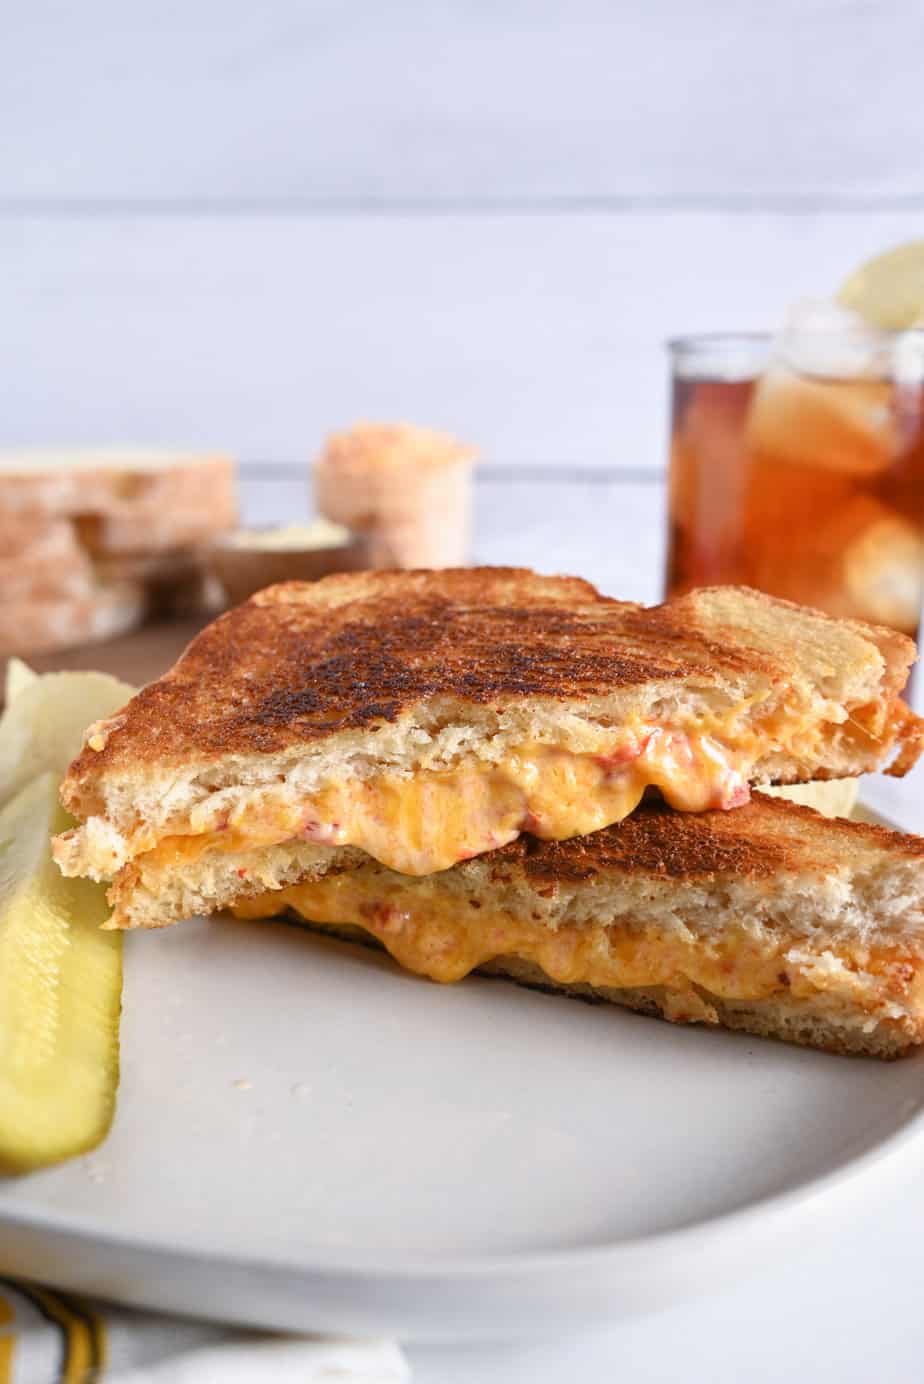 Side view of two halves of a grilled pimento cheese sandwich stacked on a white plate. A glass of iced tea is visible in the background.